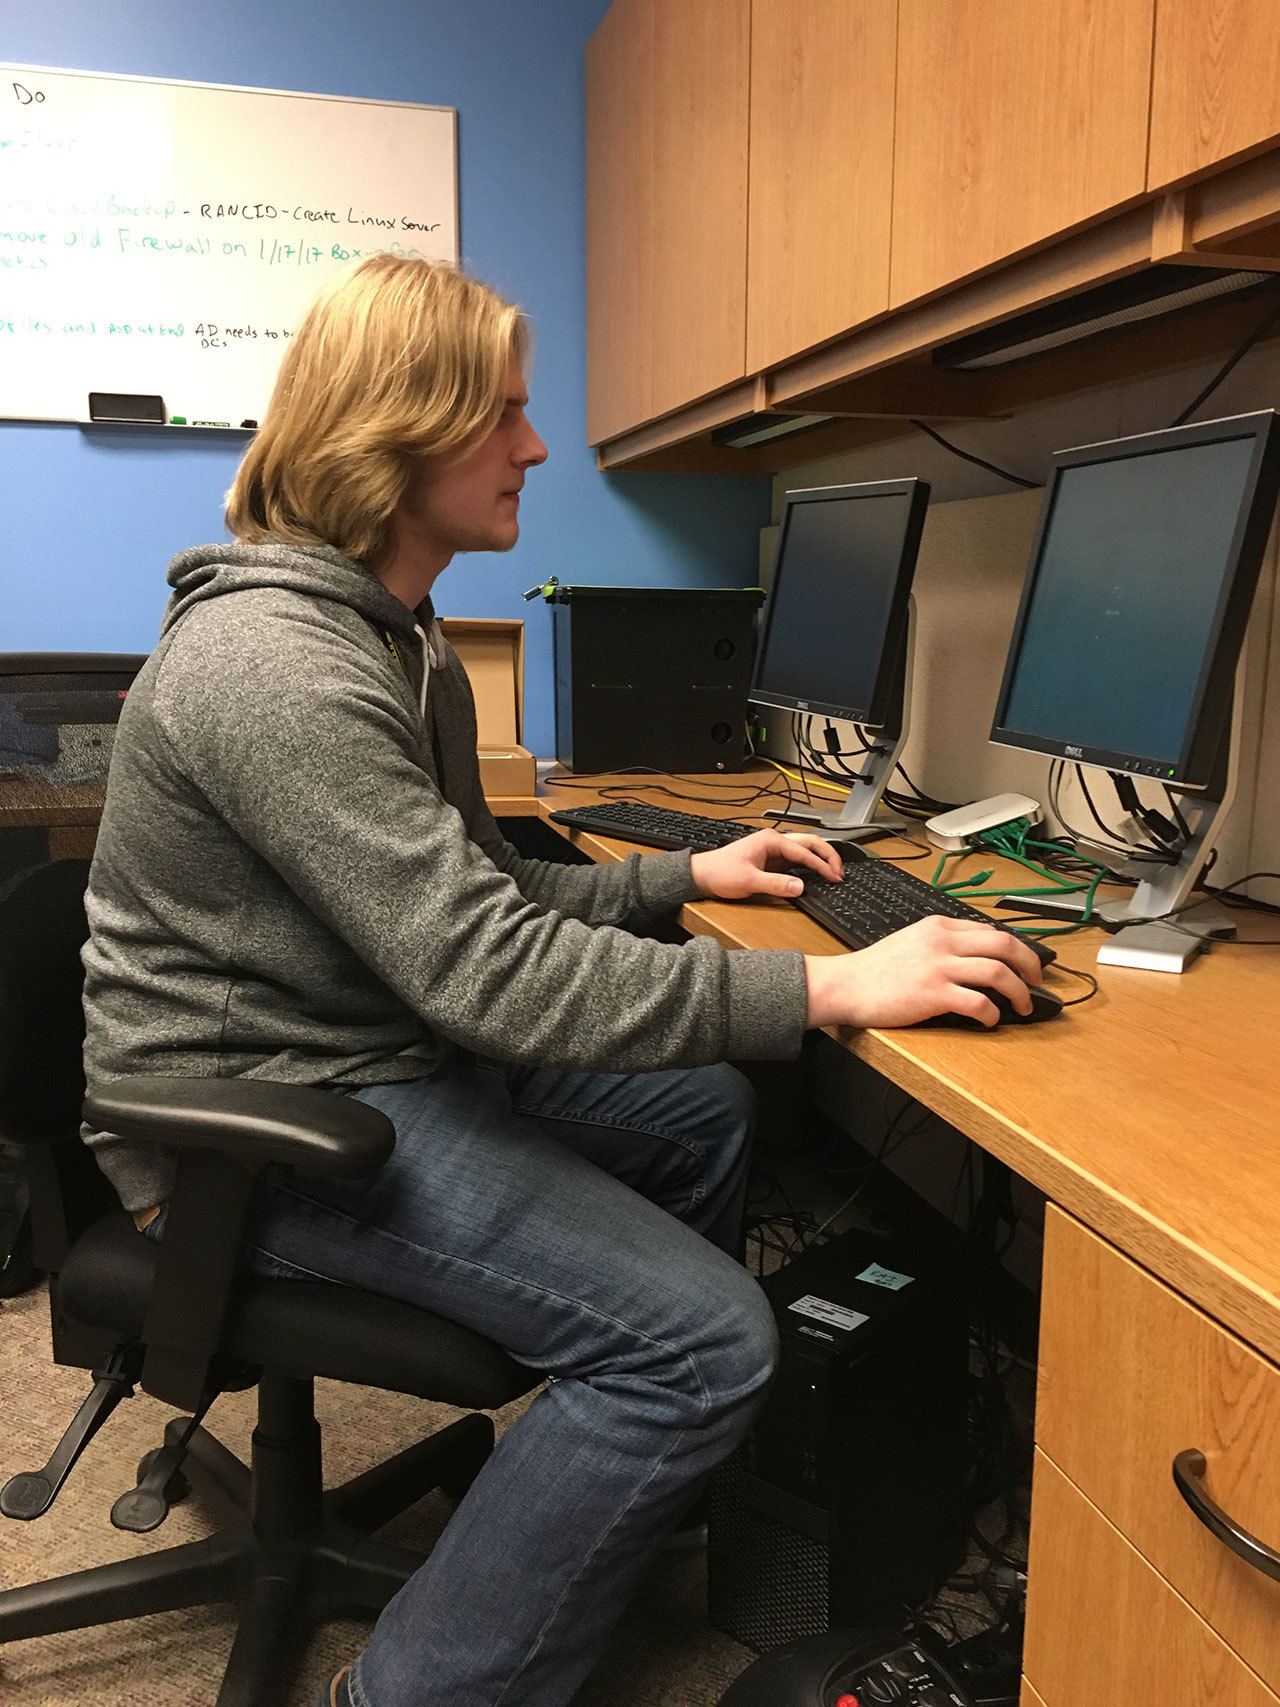 Students like Kyle Lease are taking advantage of Auburn School District’s technology department paid internship program to launch careers. CHRIS CHANCELLOR, Auburn Reporter